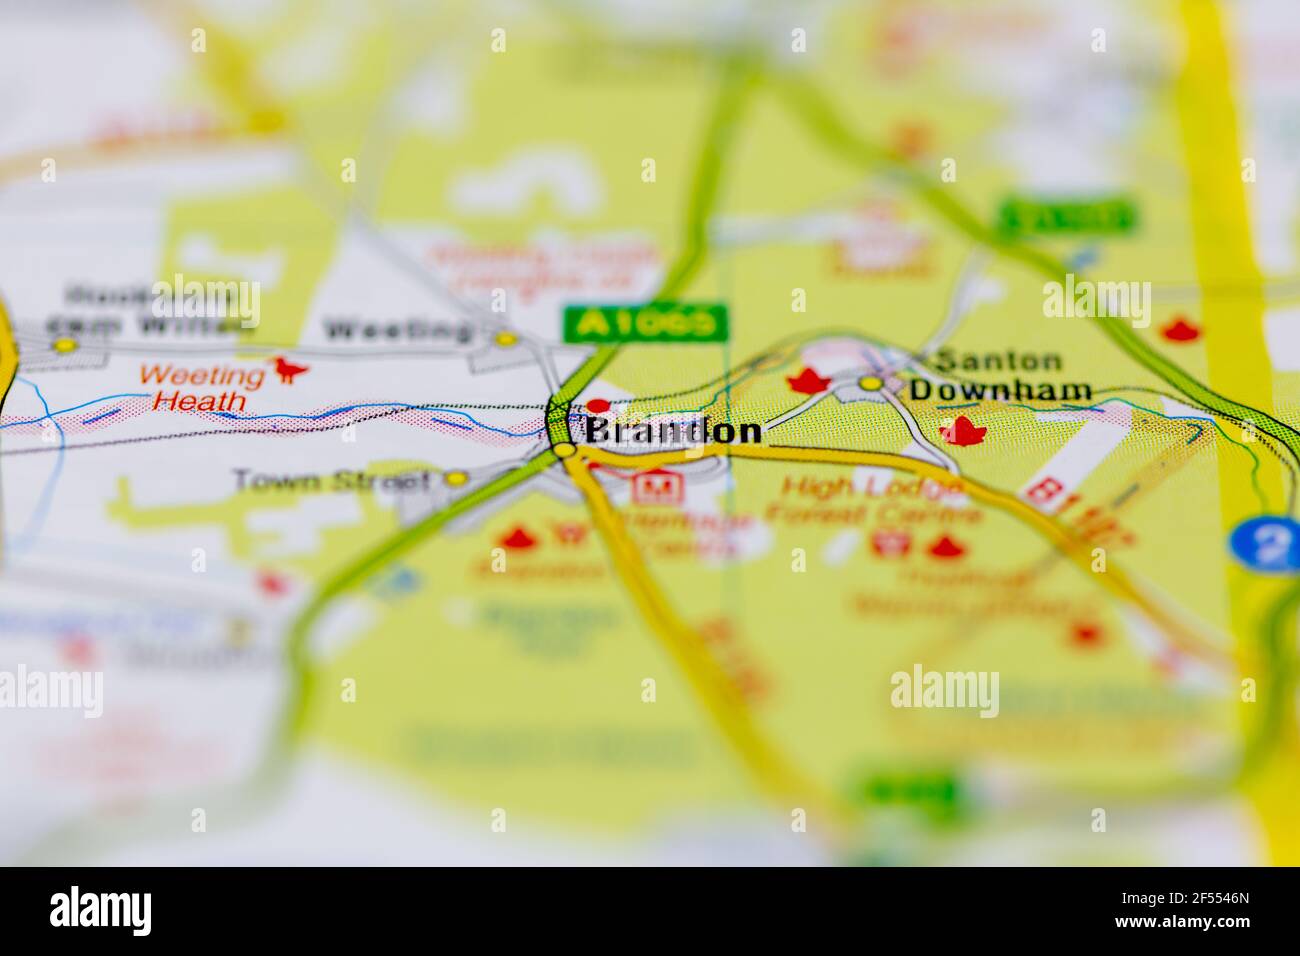 Brandon Shown on a Geography map or road map Stock Photo